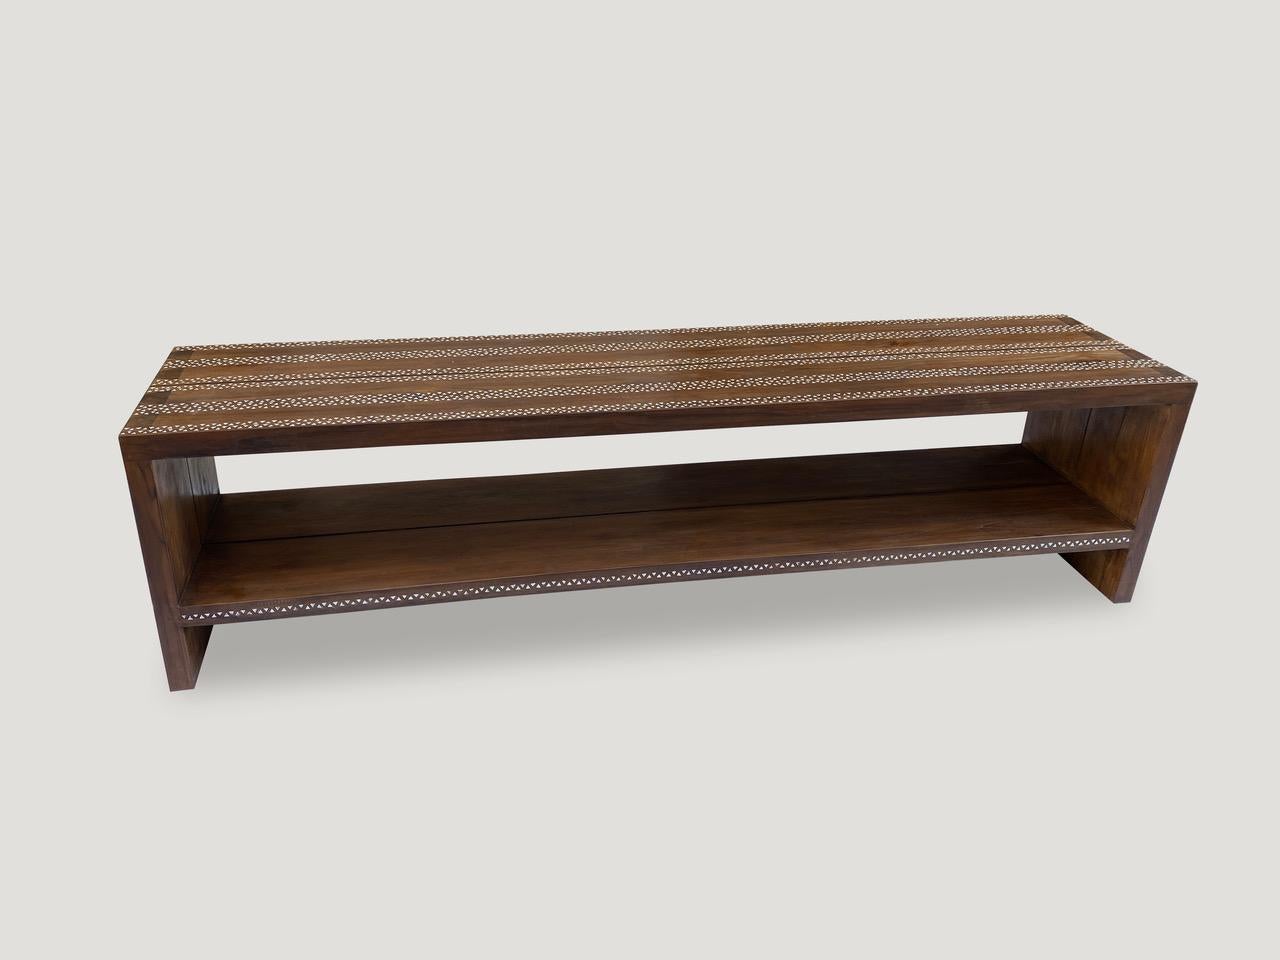 Impressive reclaimed teak wood console table with added shell inlay. Shown with a shelf 8” off the floor. The hand cut shell is inlaid into the teak wood on this beautiful console table. Custom styles available. Please inquire.

Own an Andrianna